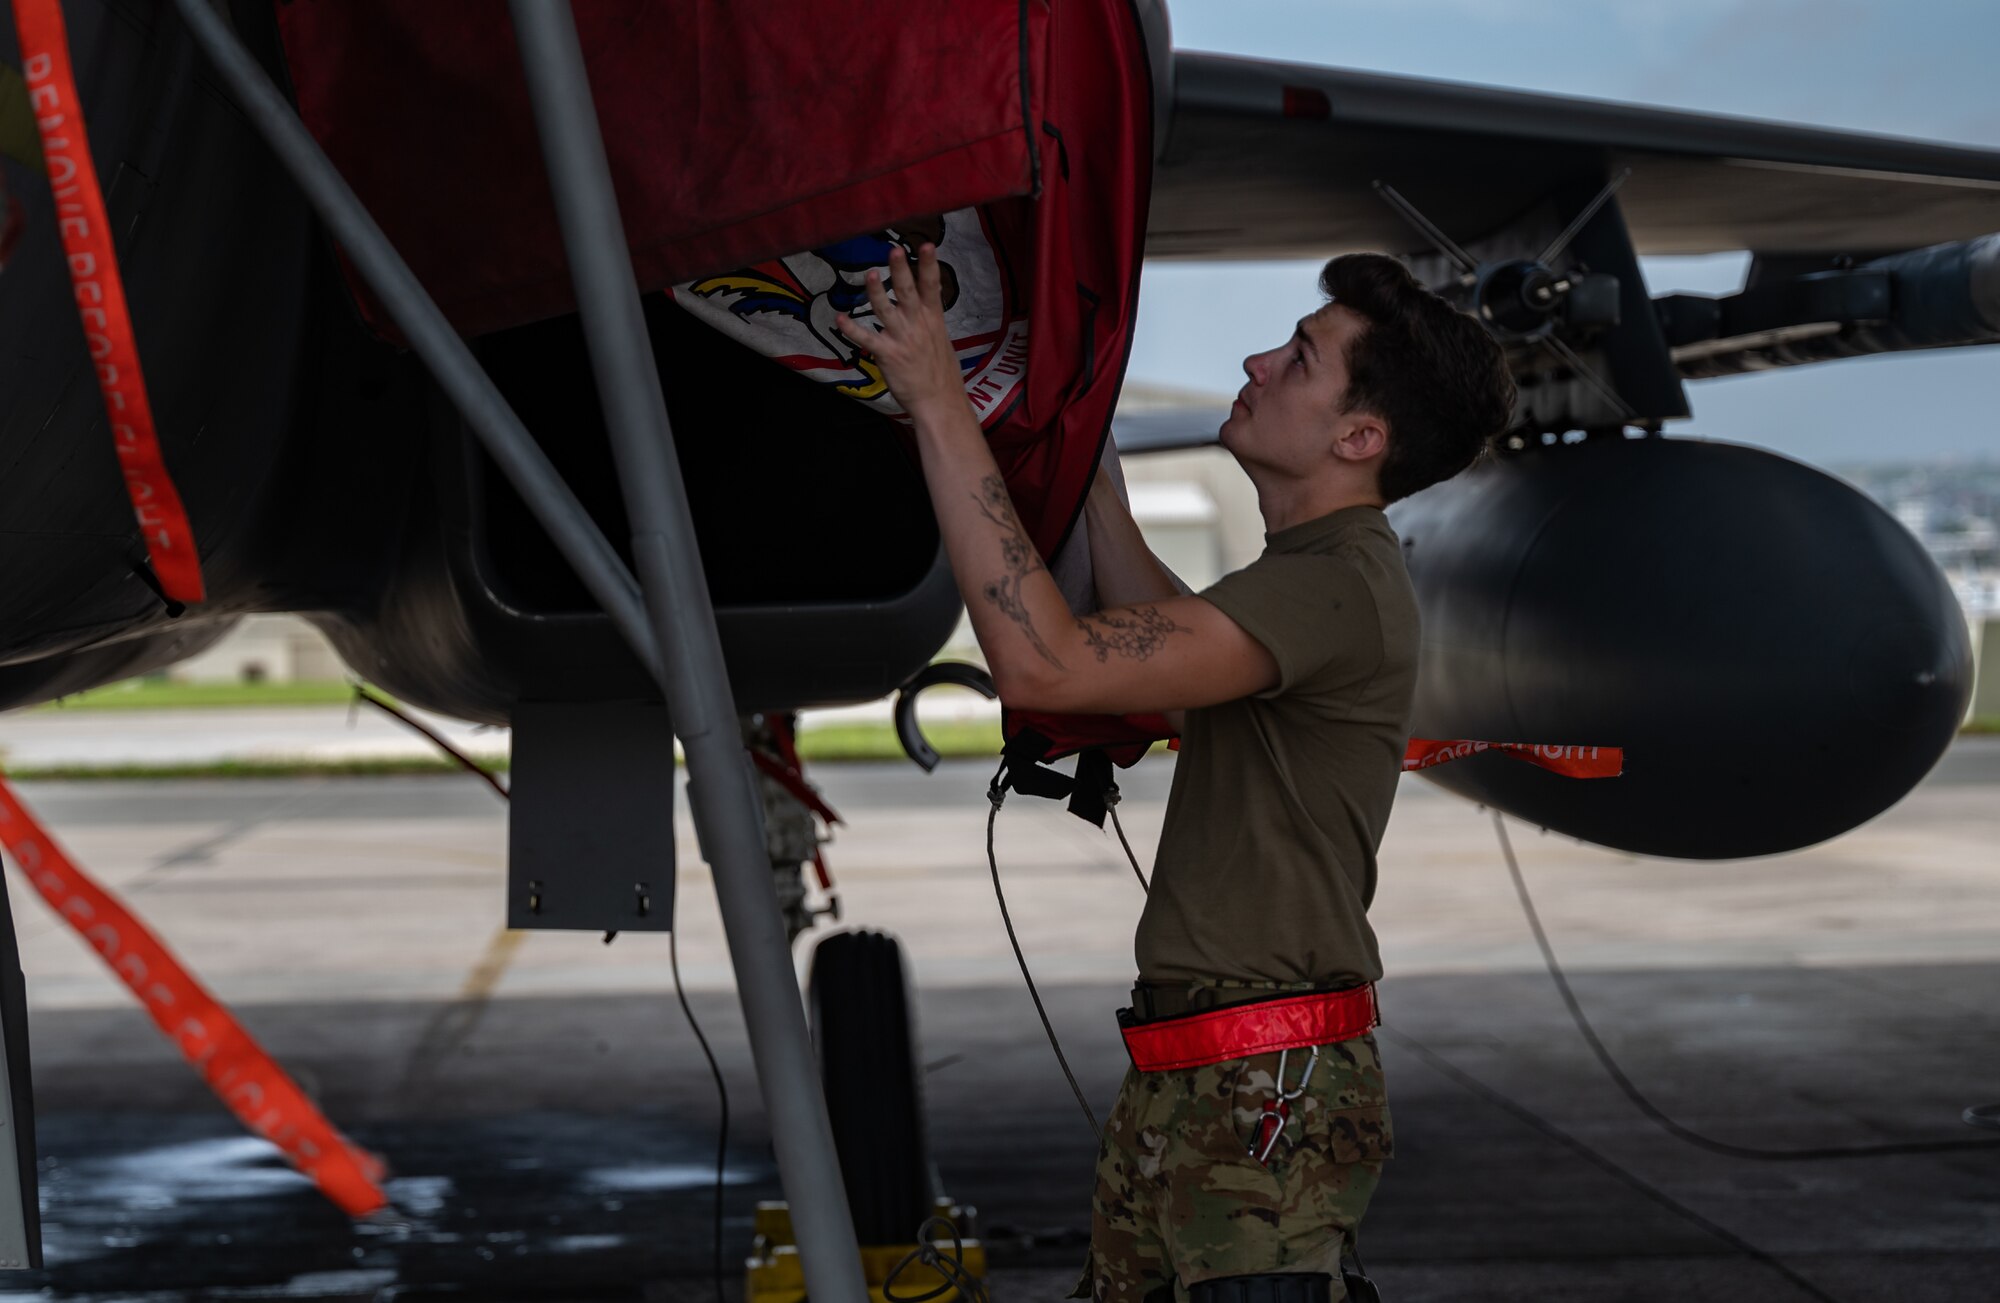 U.S. Air Force Airman 1st Class Zach Huschley, 67th Aircraft Maintenance Unit aerospace propulsion engineer, removes an intake cover at Kadena Air Base, Japan, Sept. 14, 2021. The F-15C Eagle is an all-weather, extremely maneuverable, tactical fighter designed to permit the Air Force to gain and maintain air supremacy over the battlefield. (U.S. Air Force photo by Airman 1st Class Stephen Pulter)